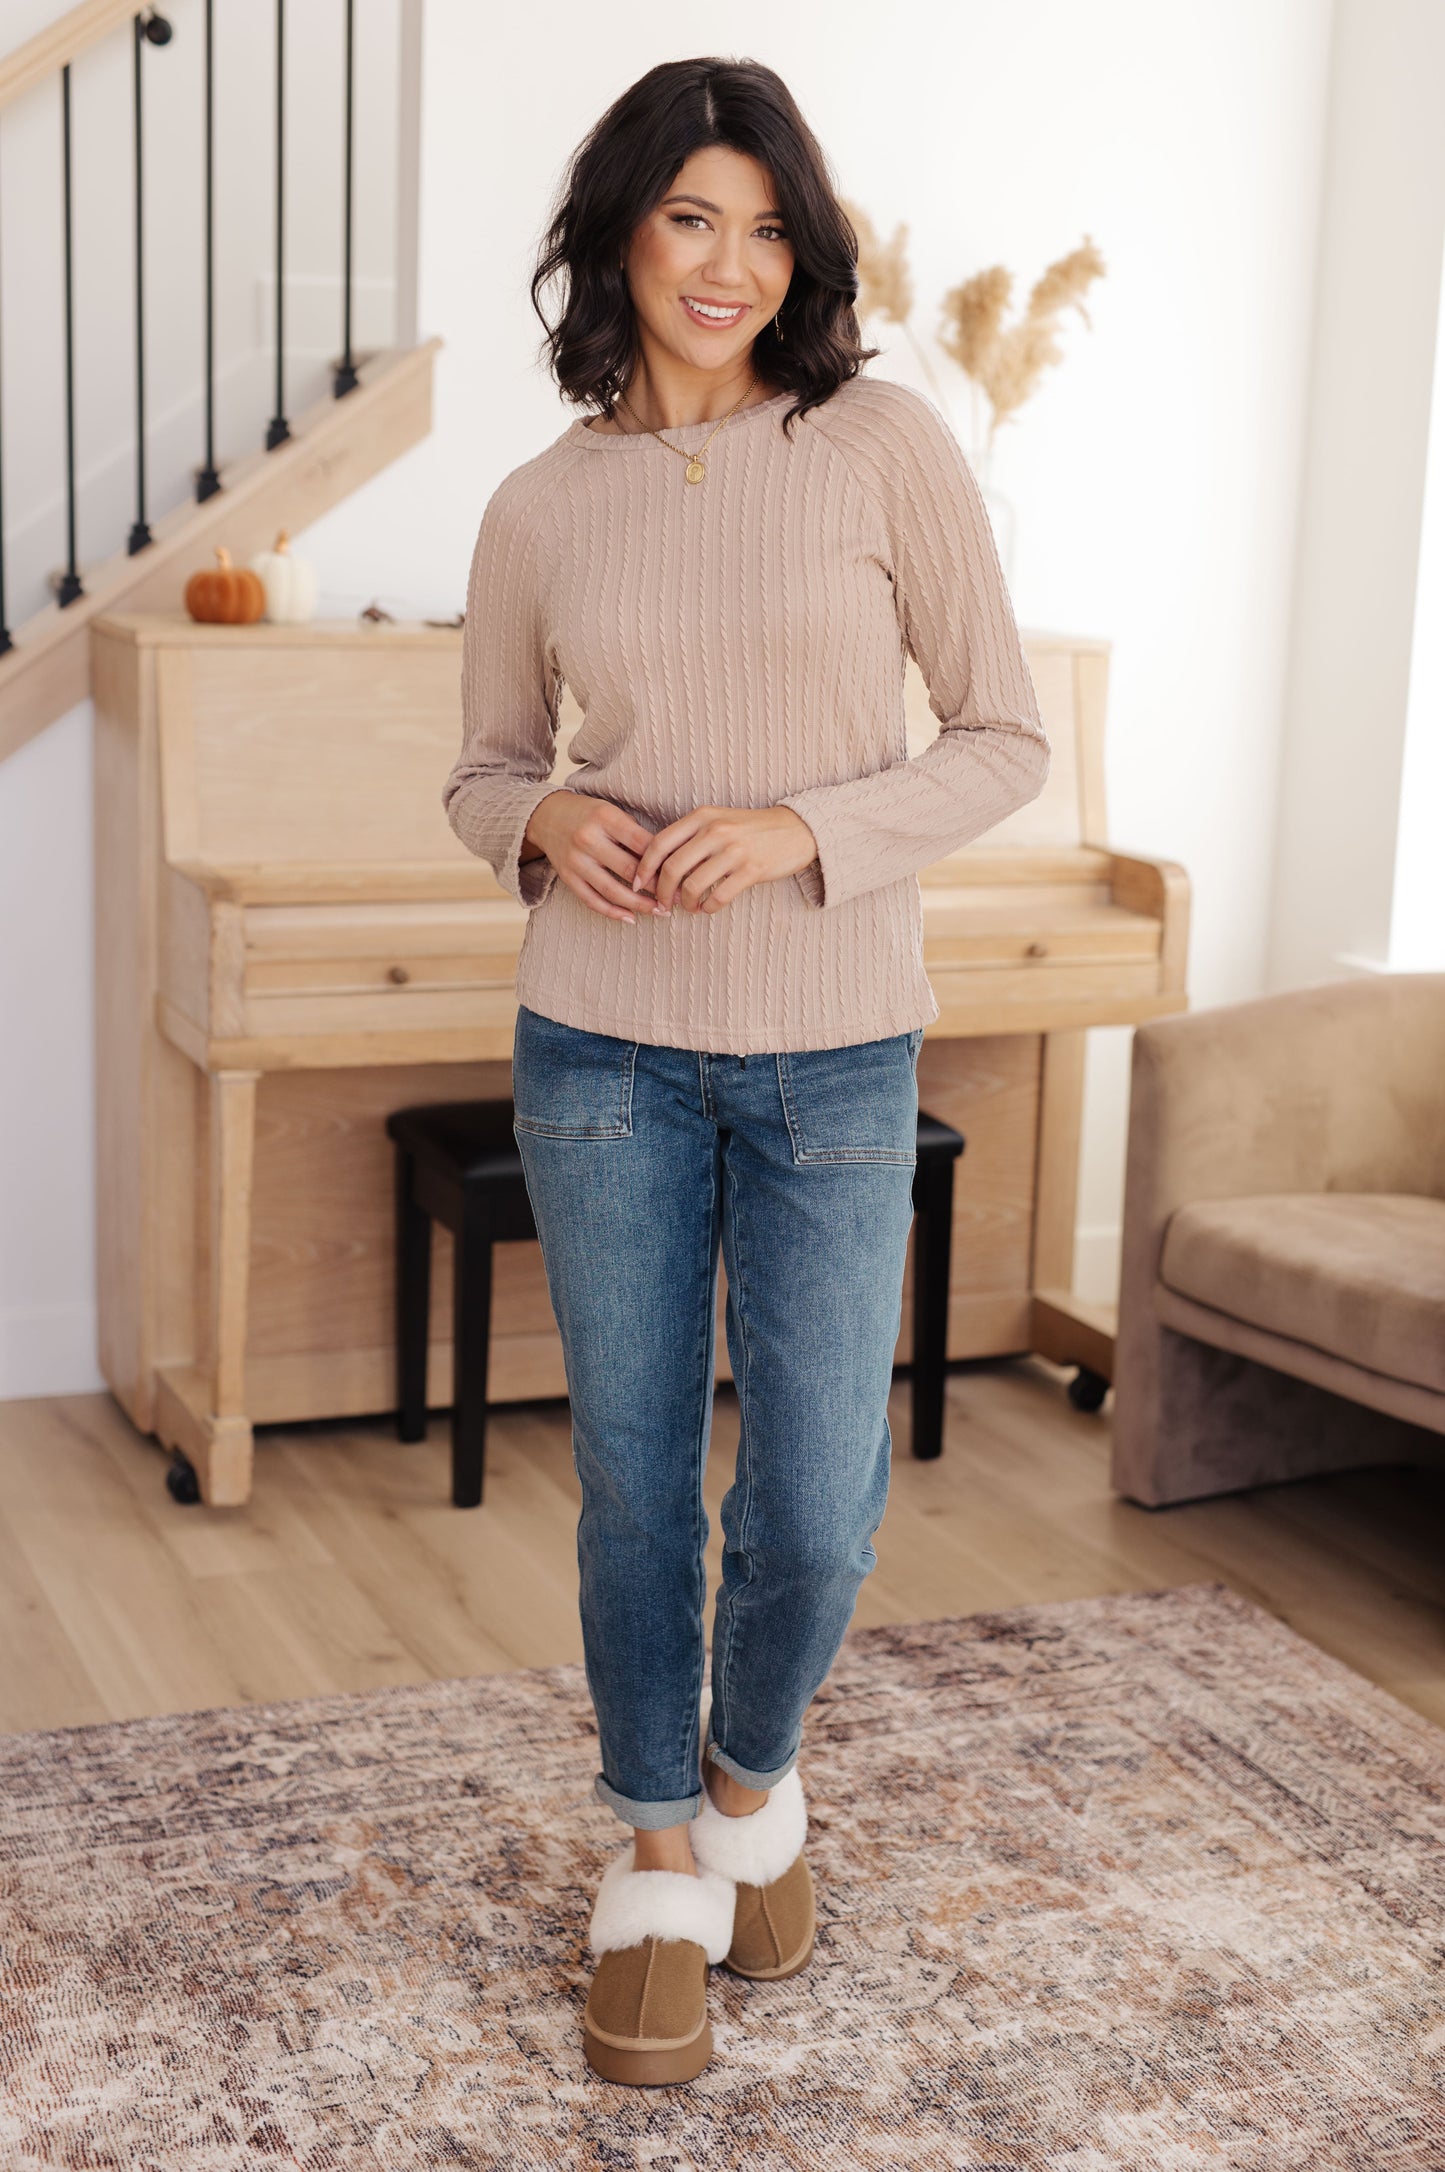 Soothe your senses in this Winding Down Cable Detail Top. A textured knit with raglan sleeves and round neckline will keep you feeling comfortable and stylish. Enjoy the luxurious softness of this timeless piece. S -3X